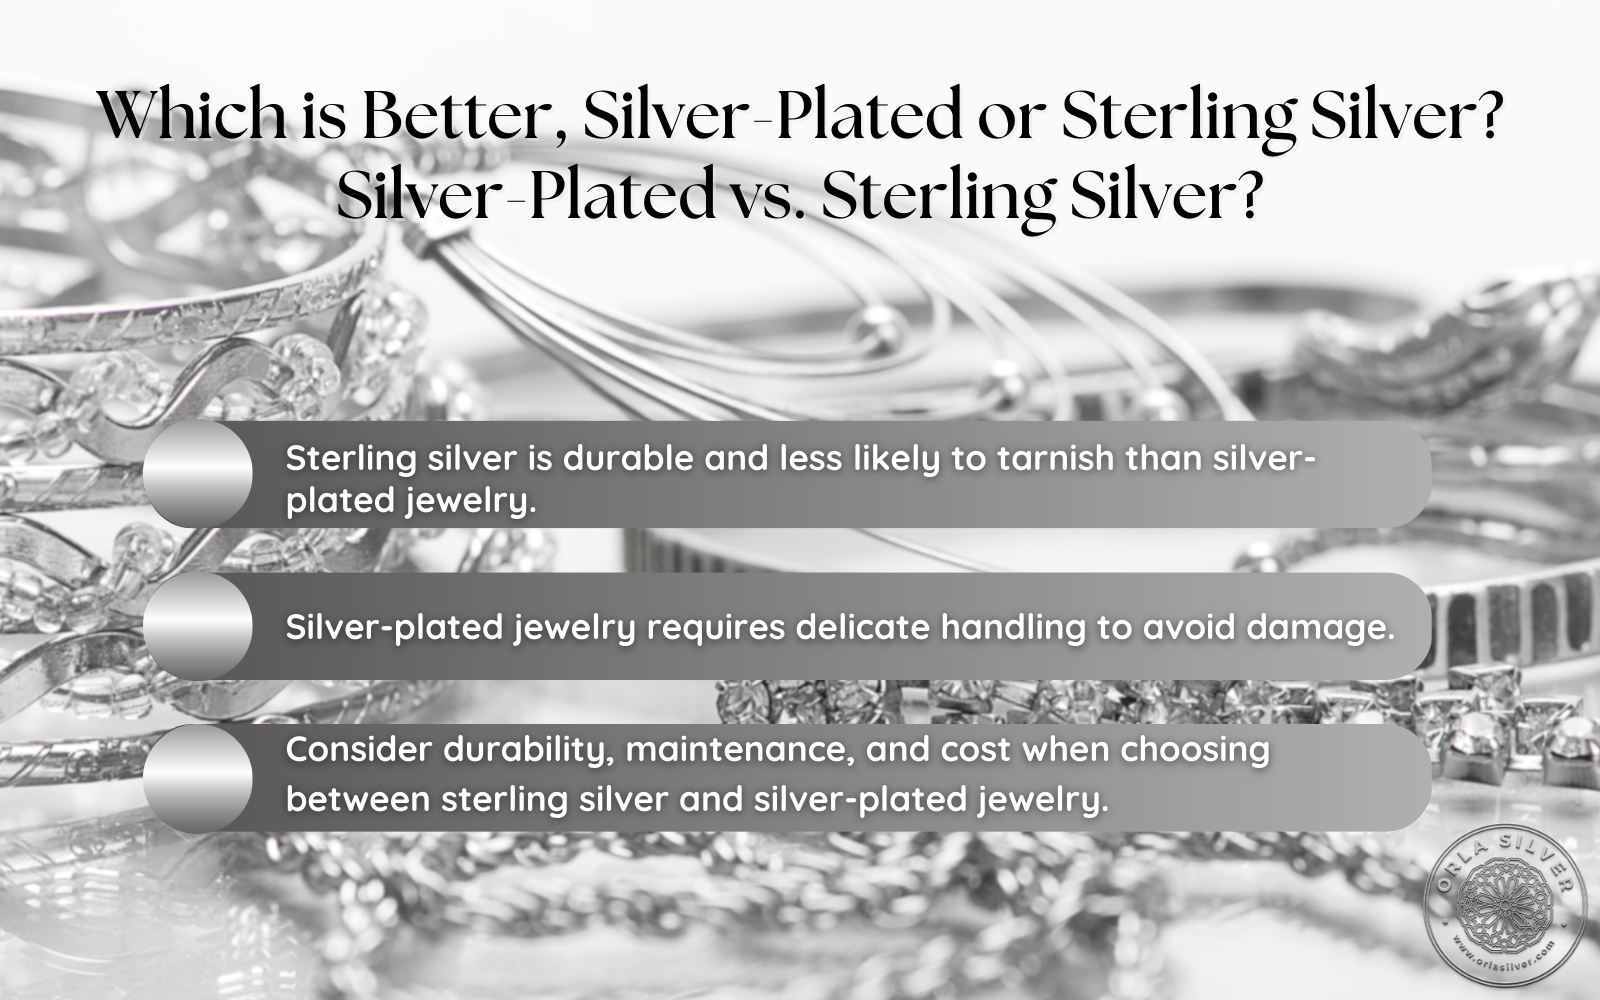  Which is Better, Silver-Plated or Sterling Silver? Silver-Plated vs. Sterling Silver?